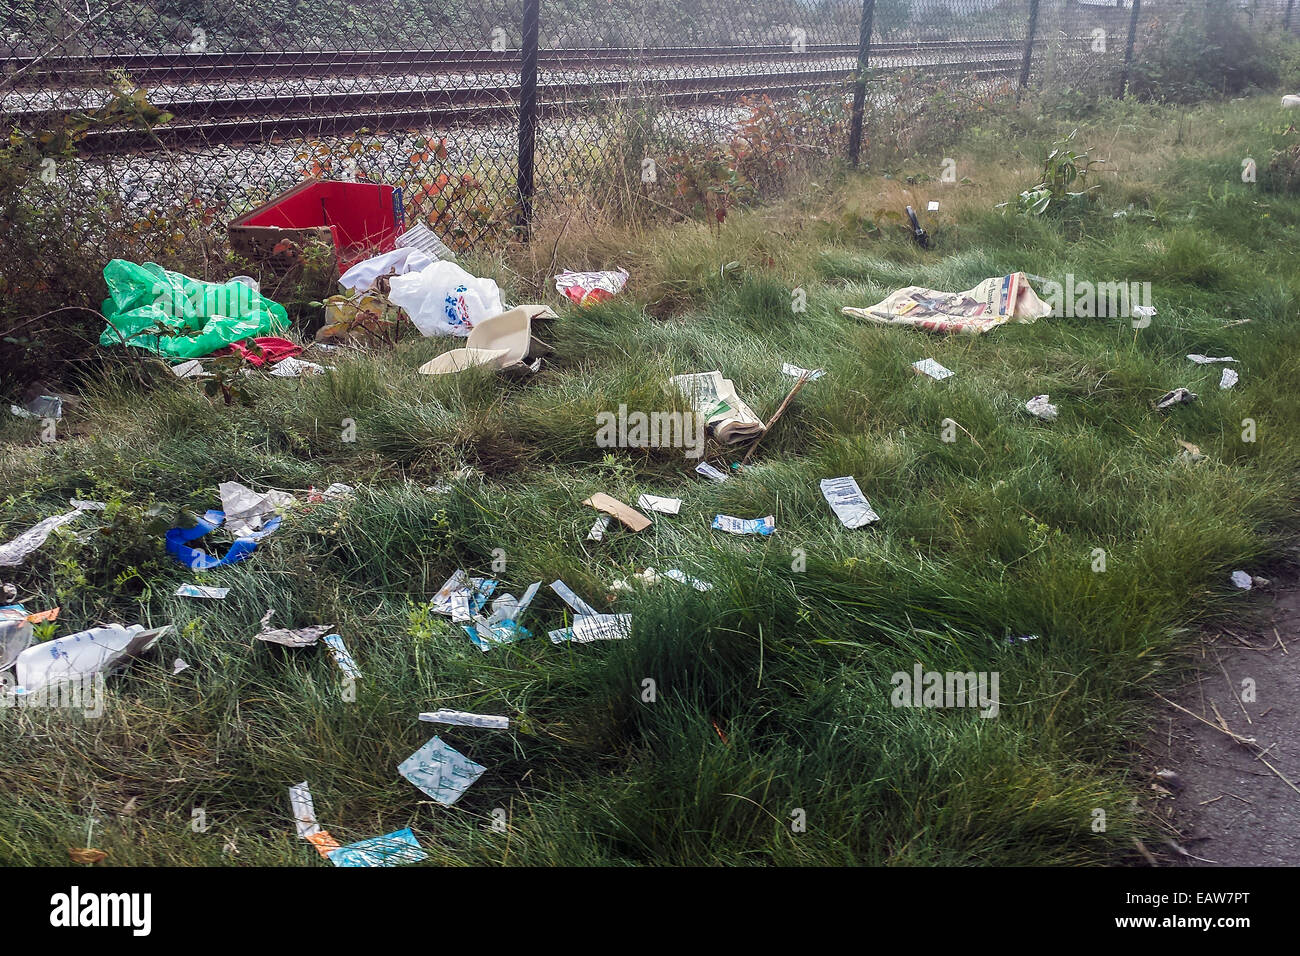 waste trash rubbish dumped tip an illegal social issue causing environmental pollution, smell, stink Stock Photo